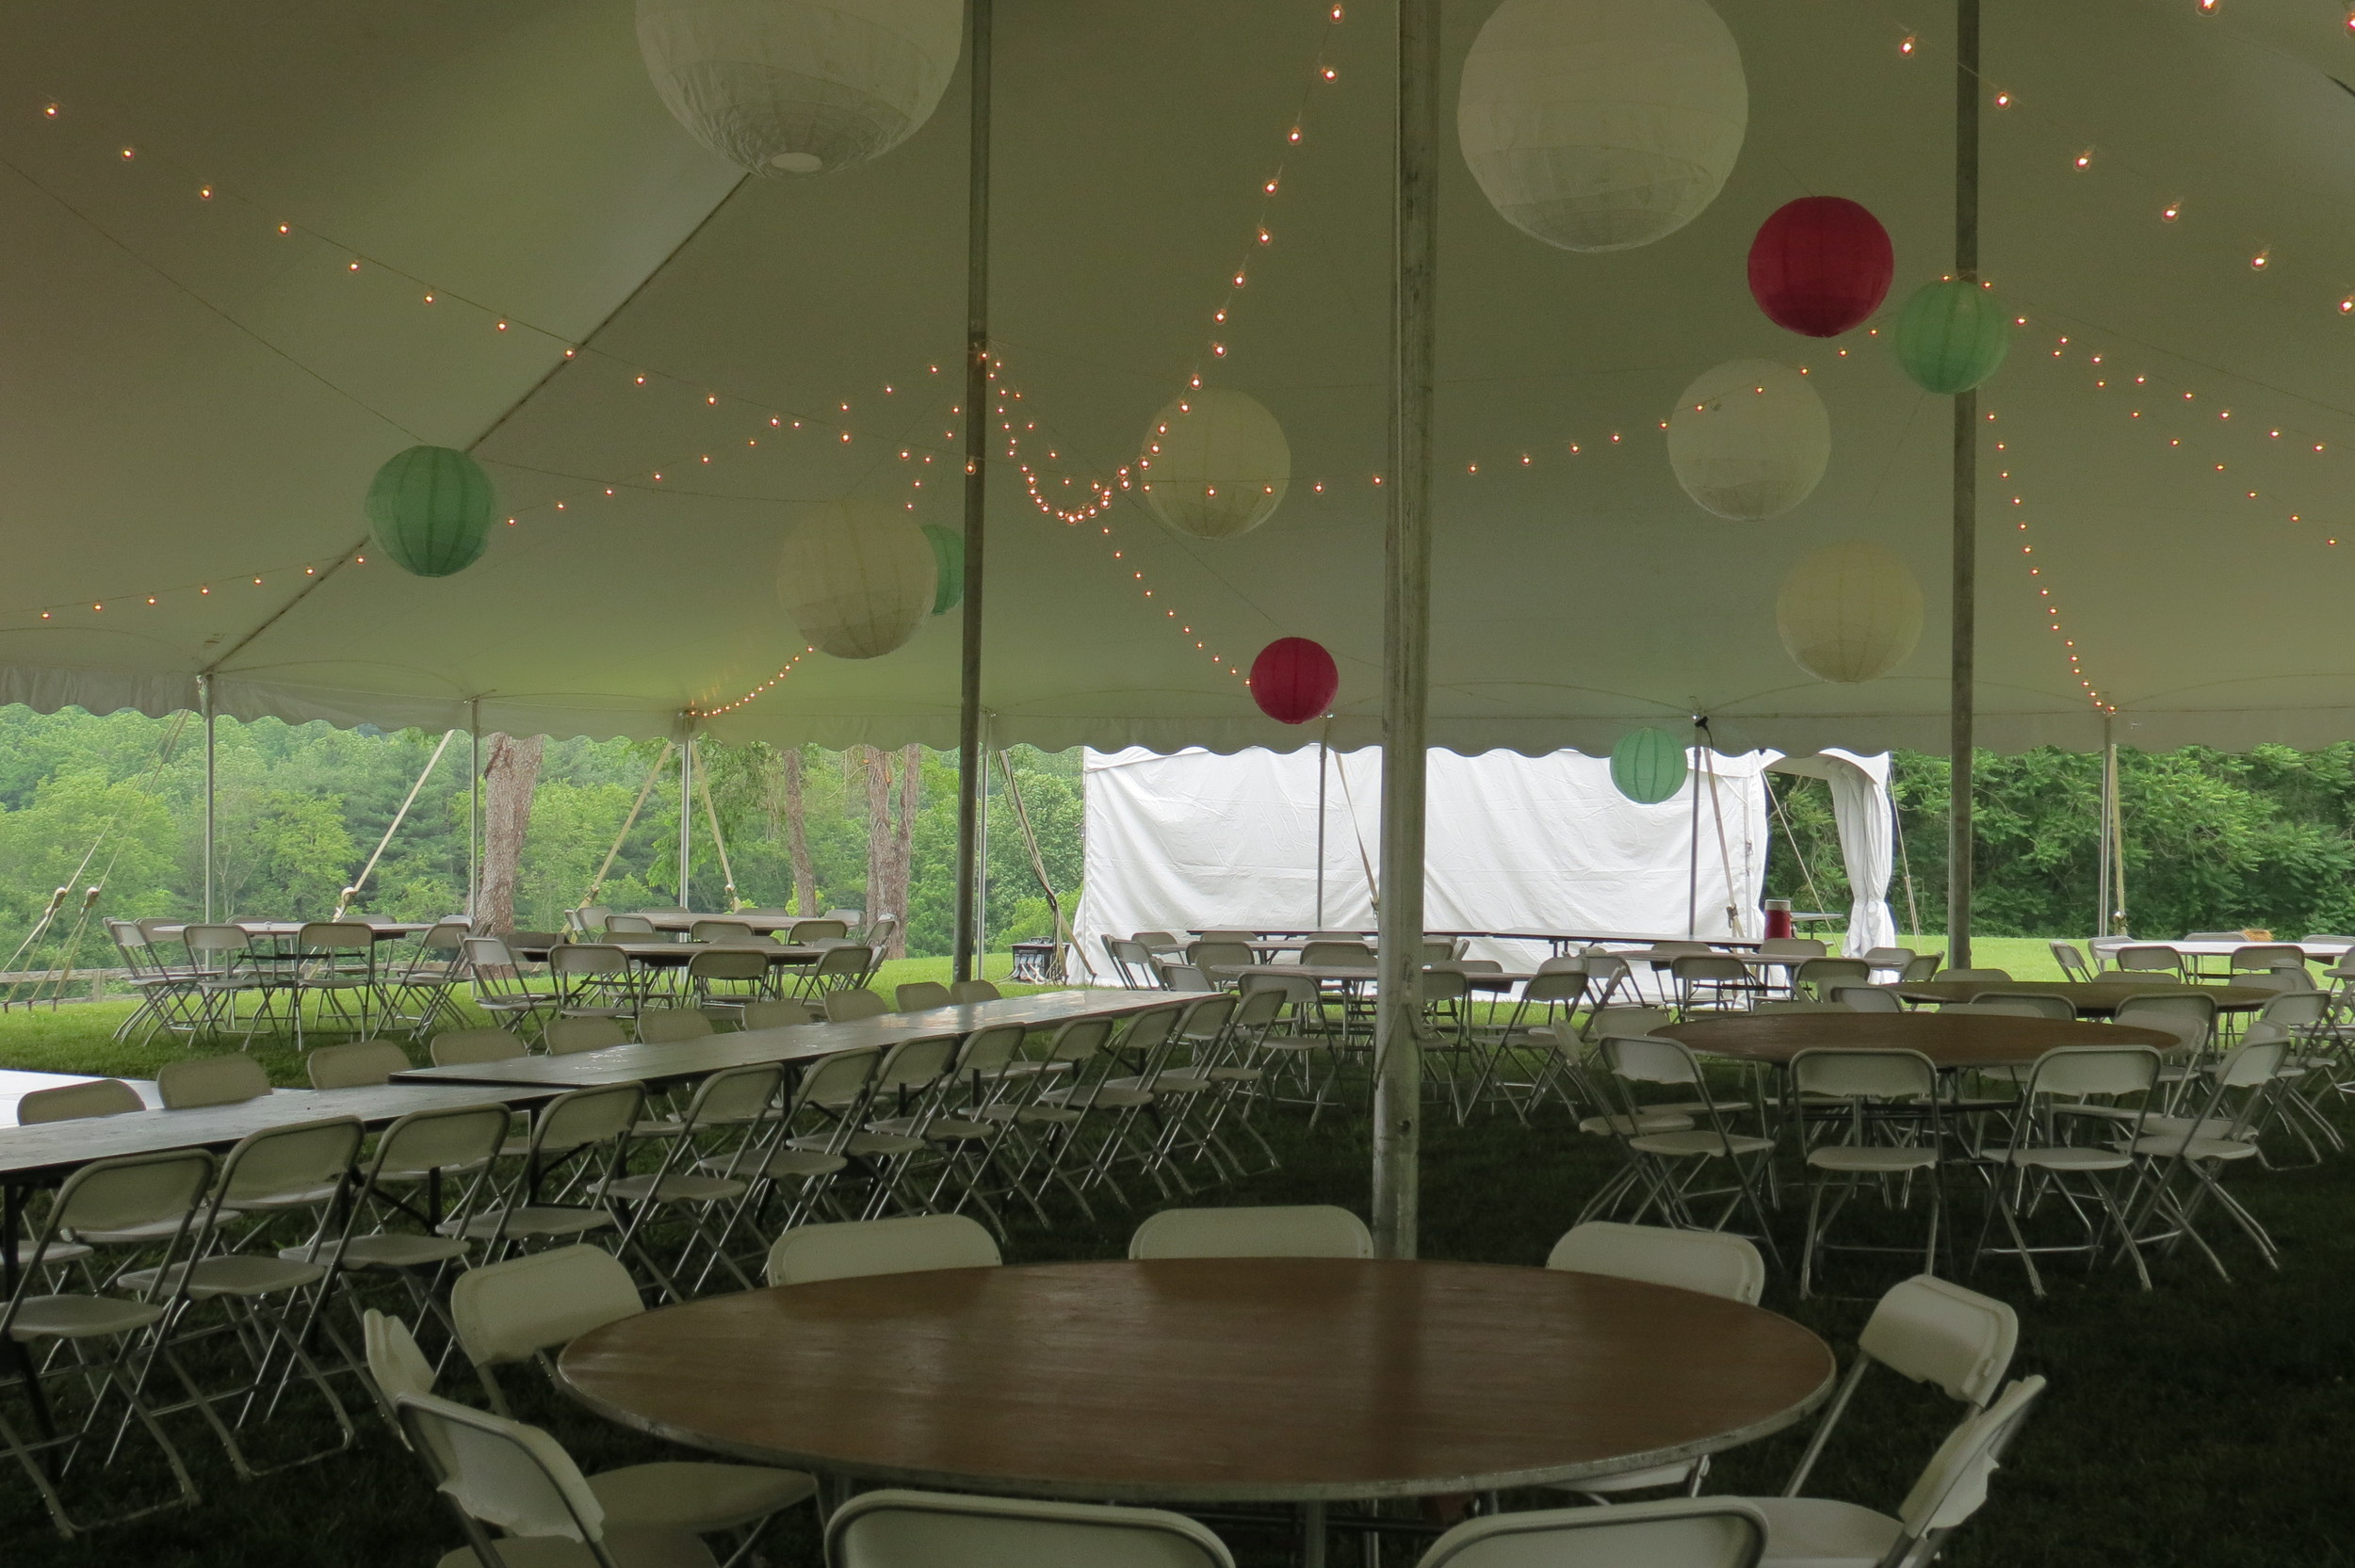 Party rentals in Carlisle, PA